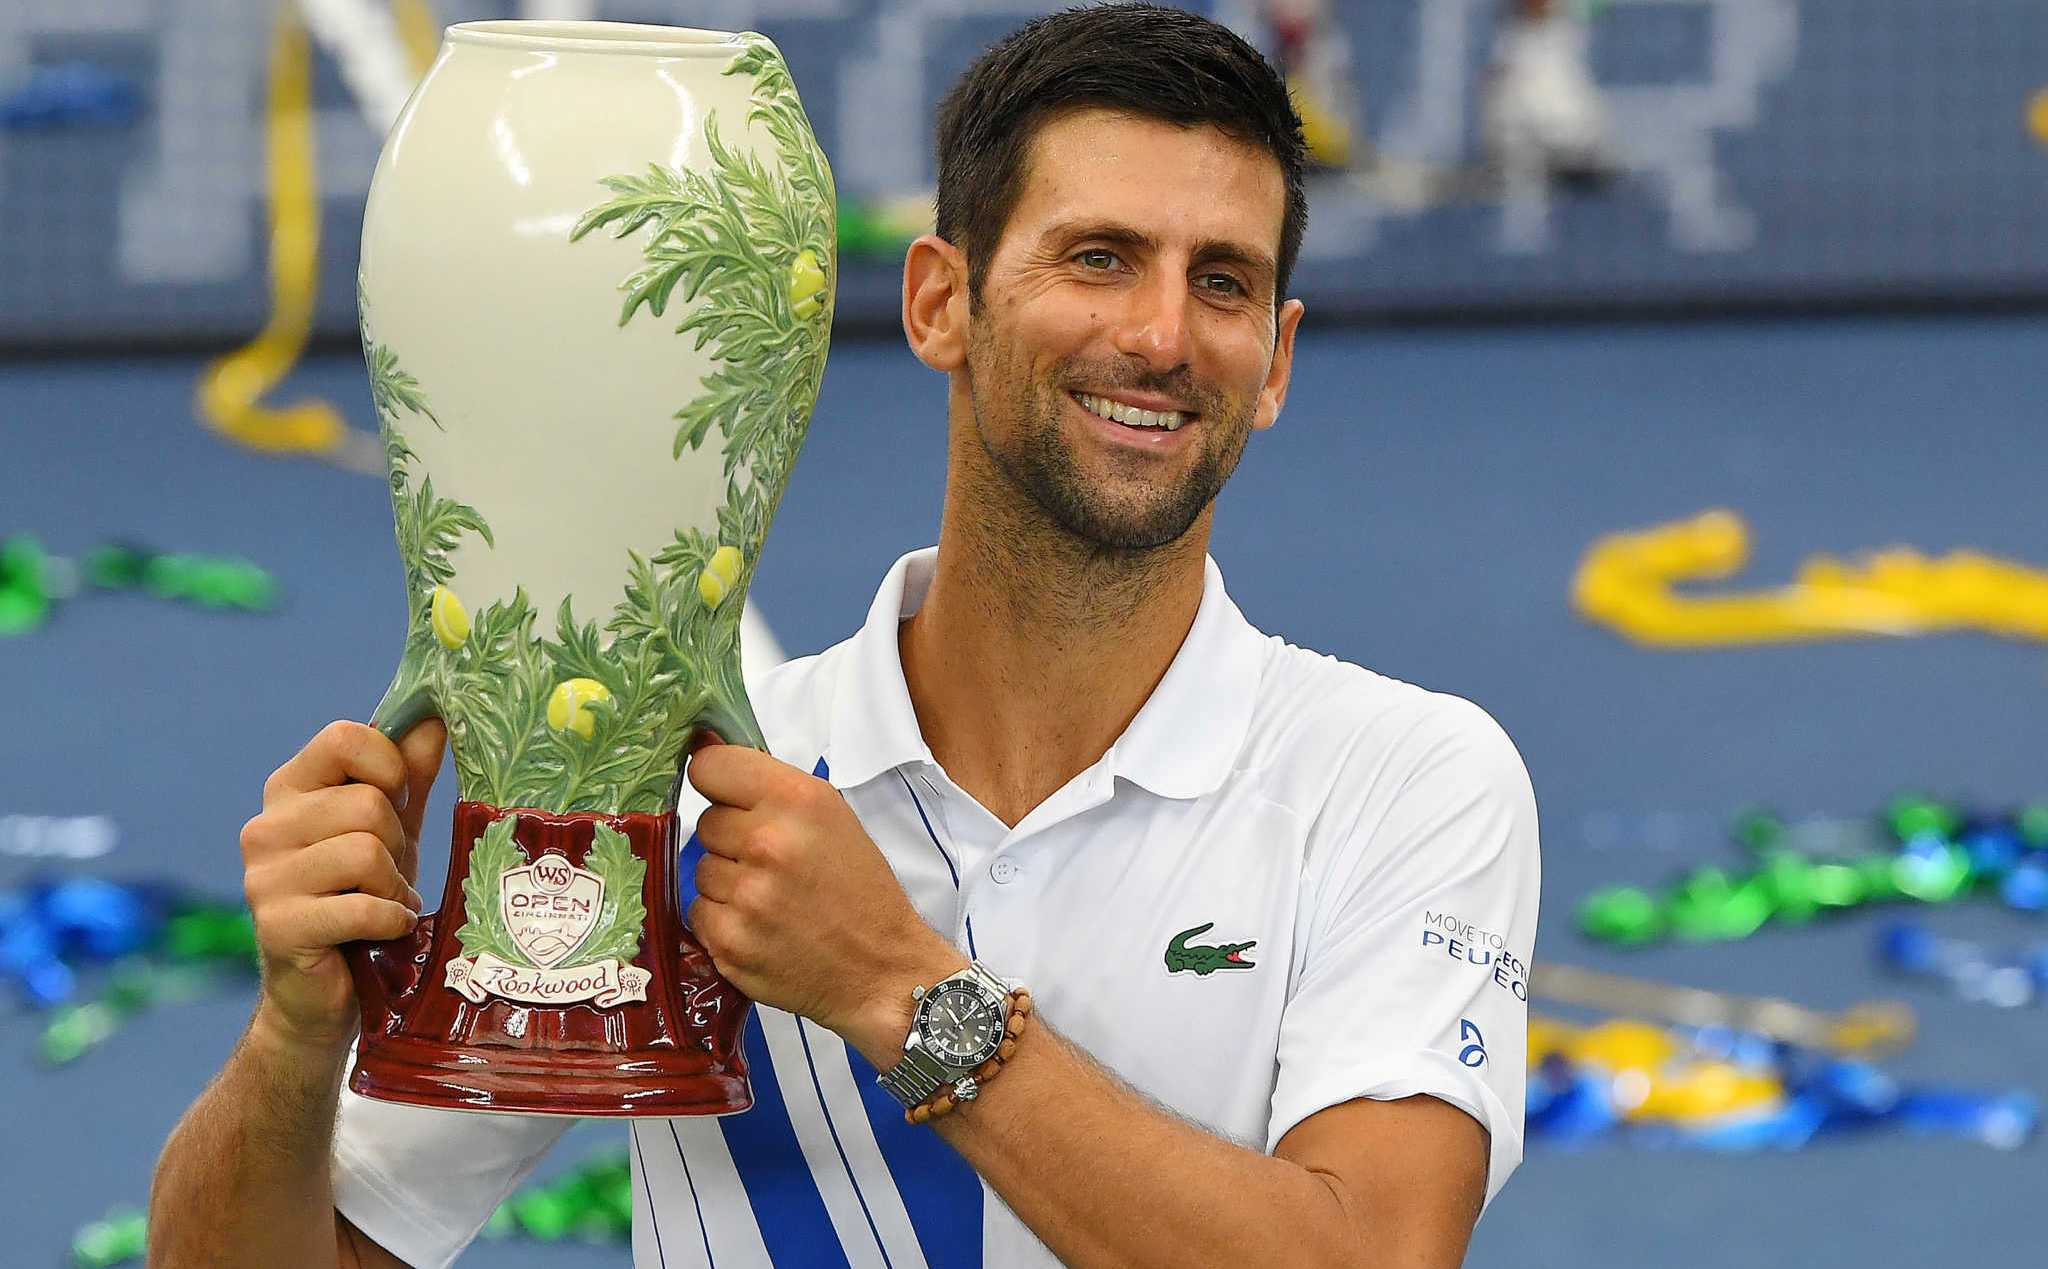 Aug 29, 2020; Flushing Meadows, New York, USA; Mens champion Novak Djokovic (SRB) poses with the trophy following his win over Milos Raonic (CAN) in the Western & Southern Open at the USTA Billie Jean King National Tennis Center. Mandatory Credit: Robert Deutsch-USA TODAY Sports